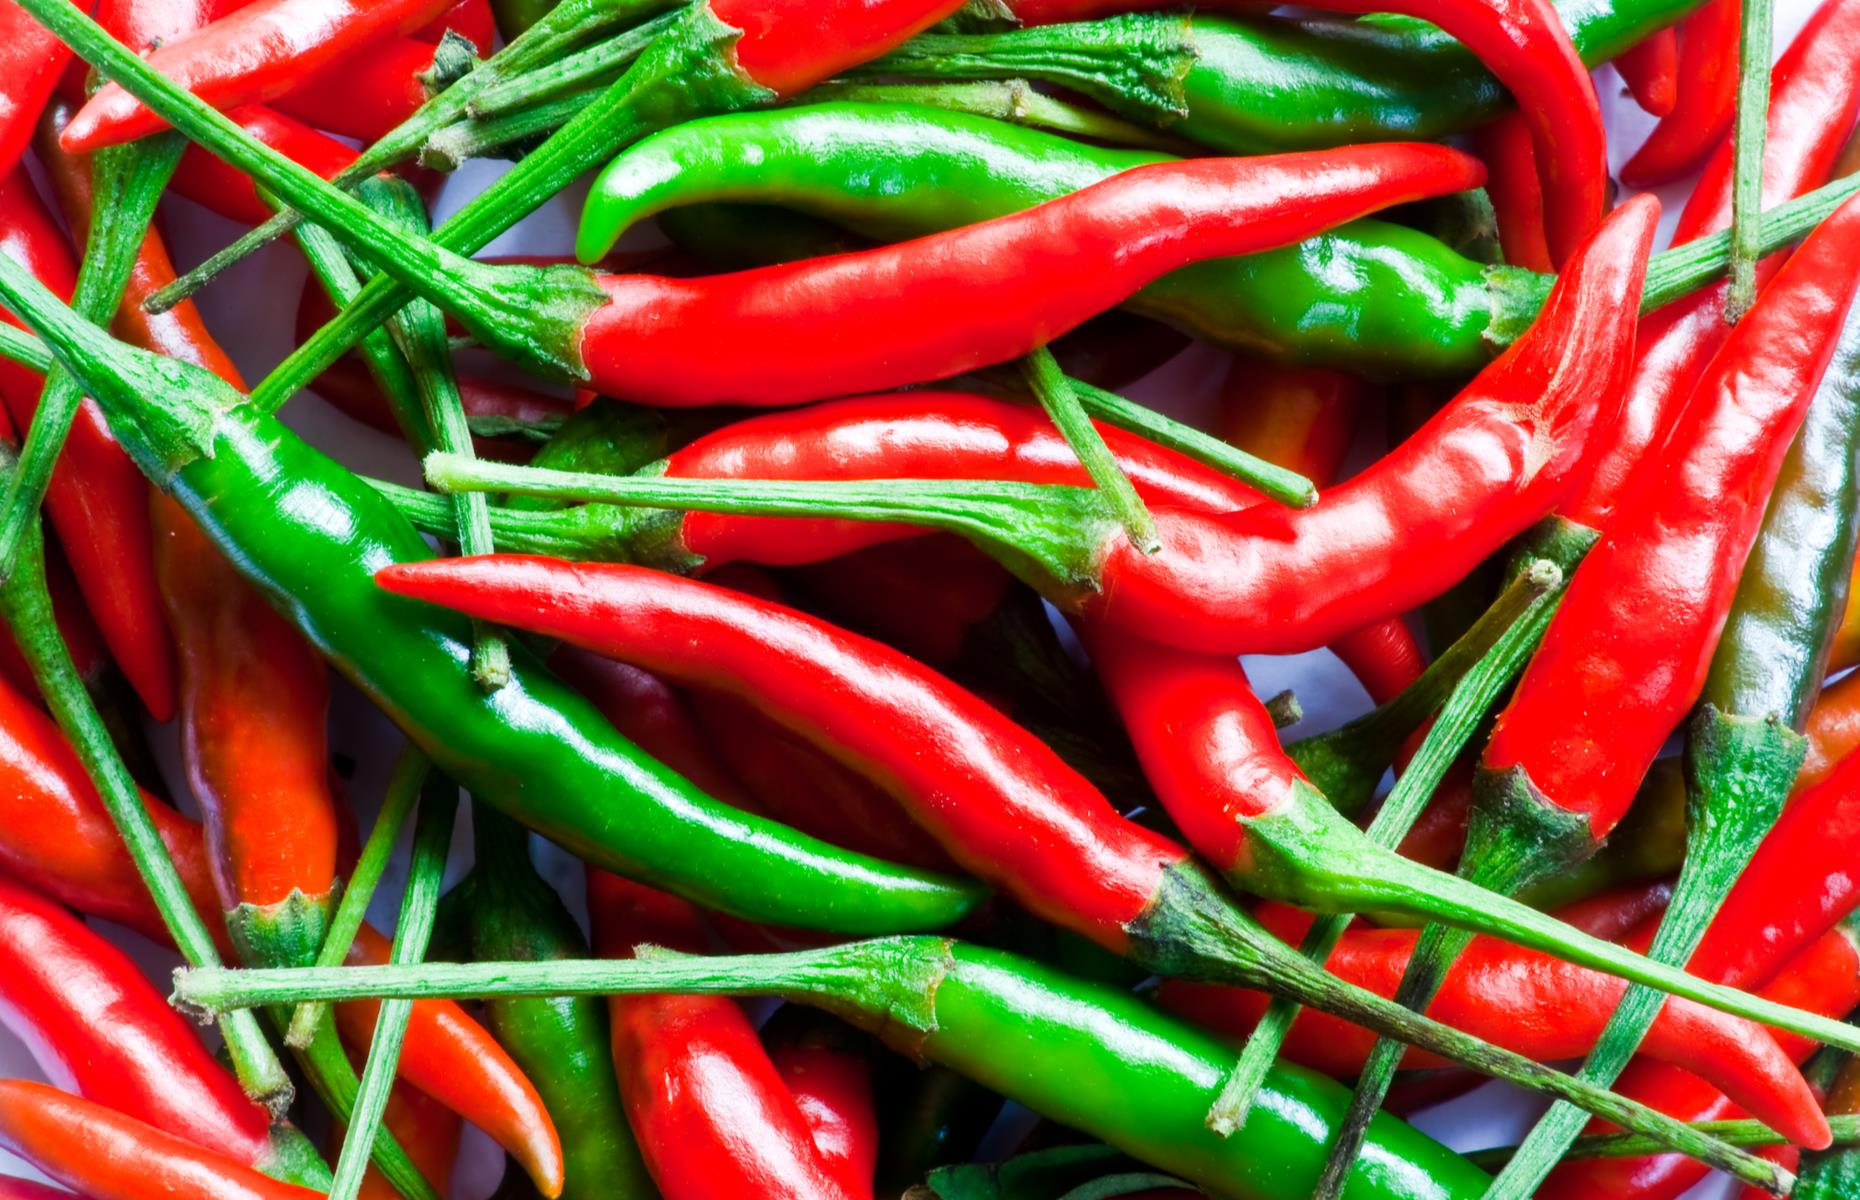 <p>Believe it or not, but green chilies are just as hot as red – they are at the unripe stage when green. Just like the difference between a green and red bell pepper, red chilies will be sweeter and more rounded in flavor, but still as hot. </p>